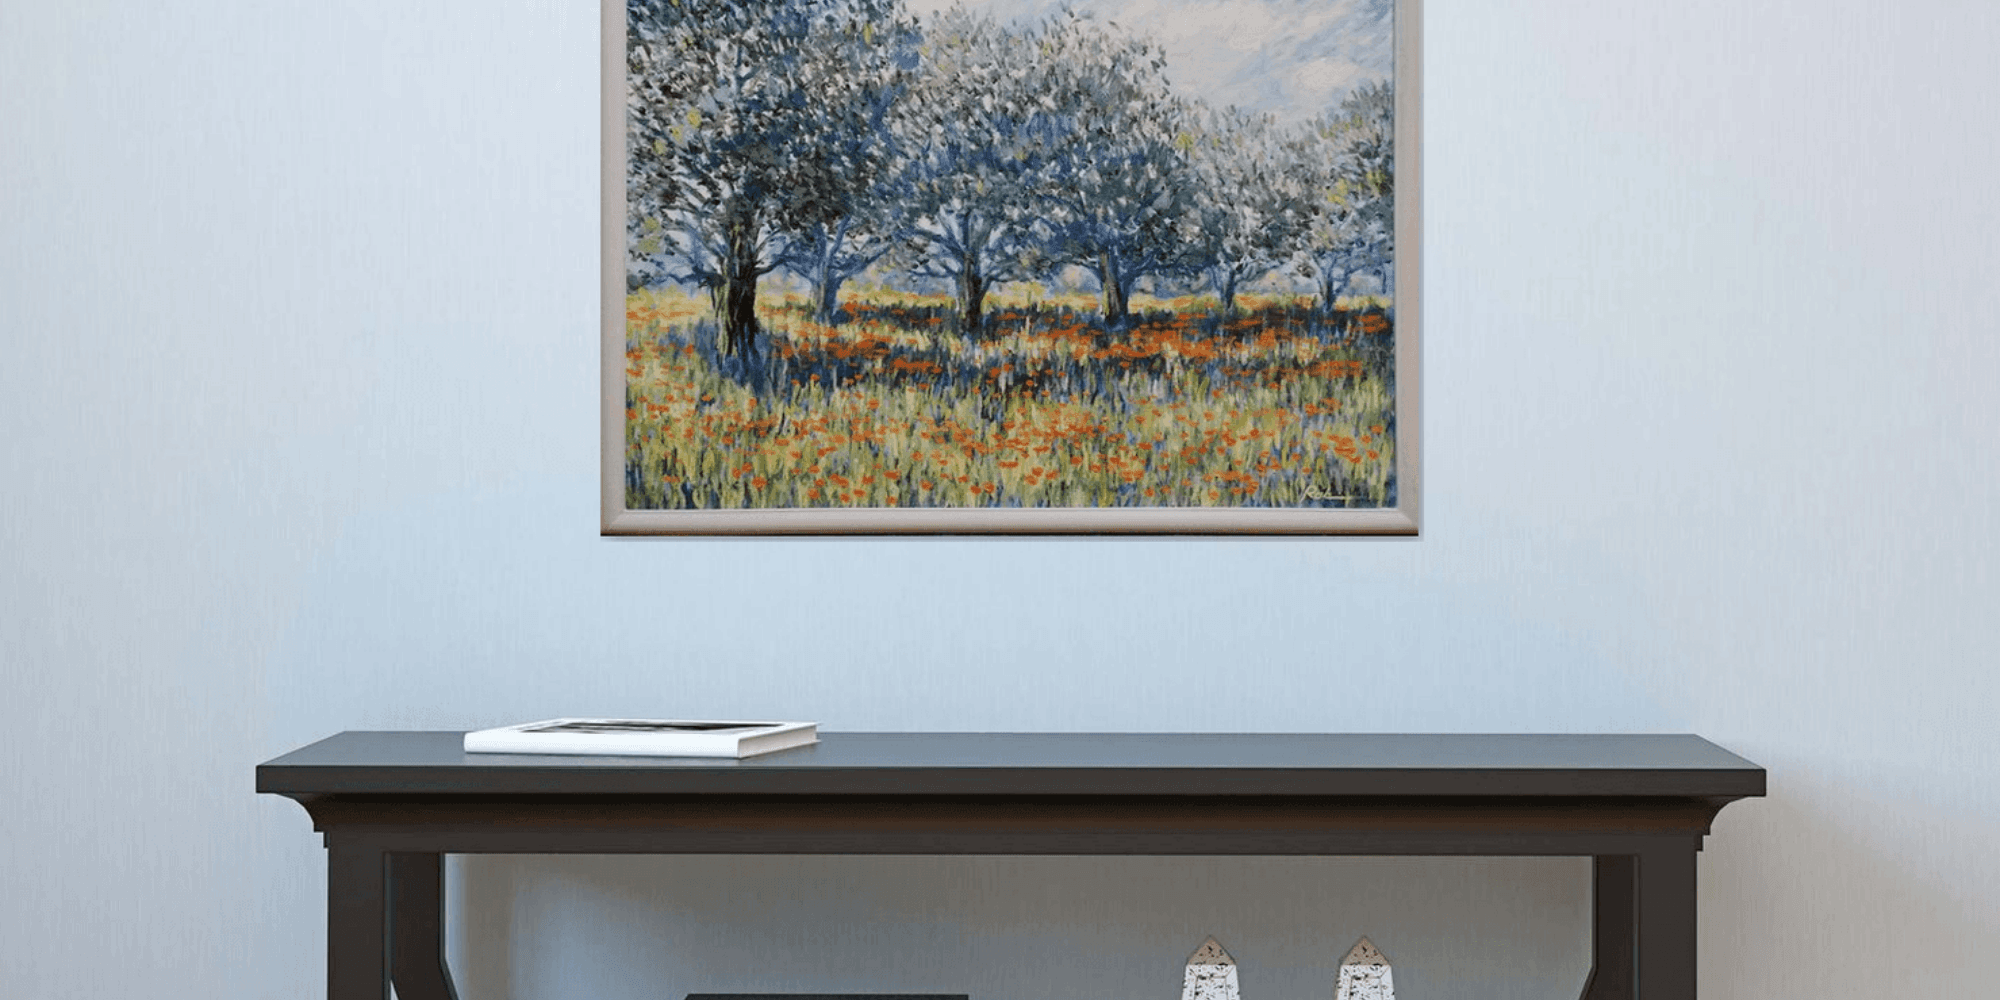 How to buy art for your hallway - yes, you read that right!